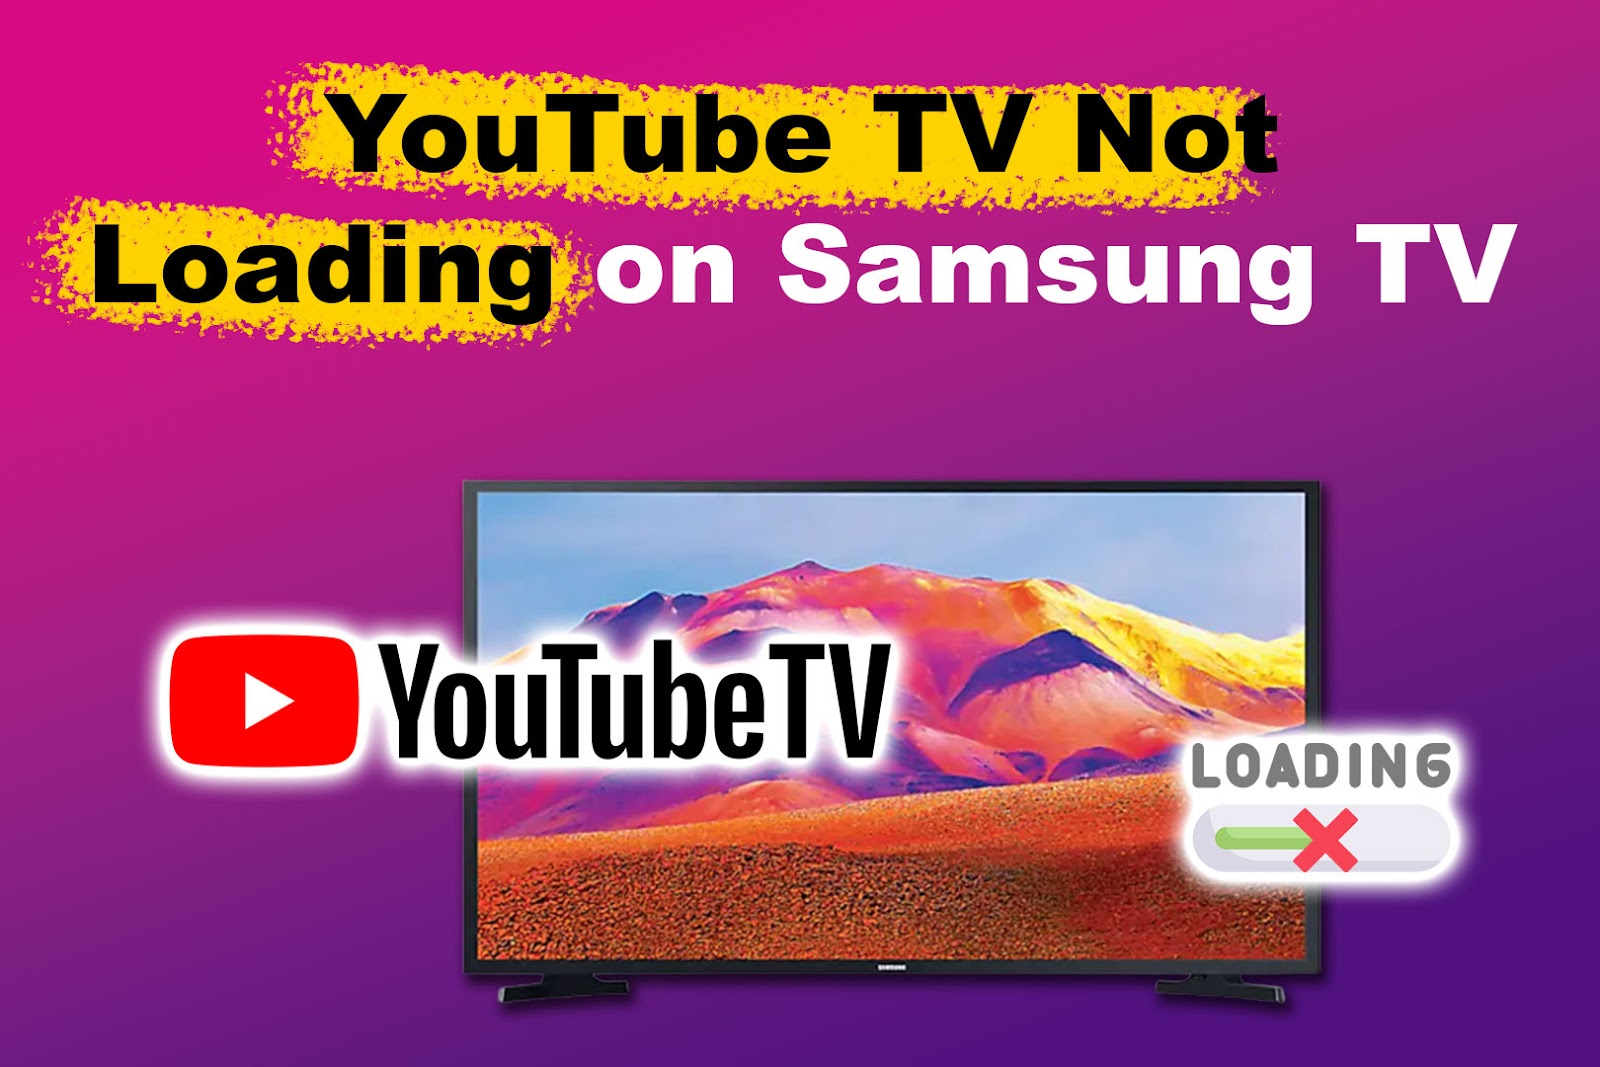 YouTube TV Not Loading on Samsung TV [✓Do This to Fix It]